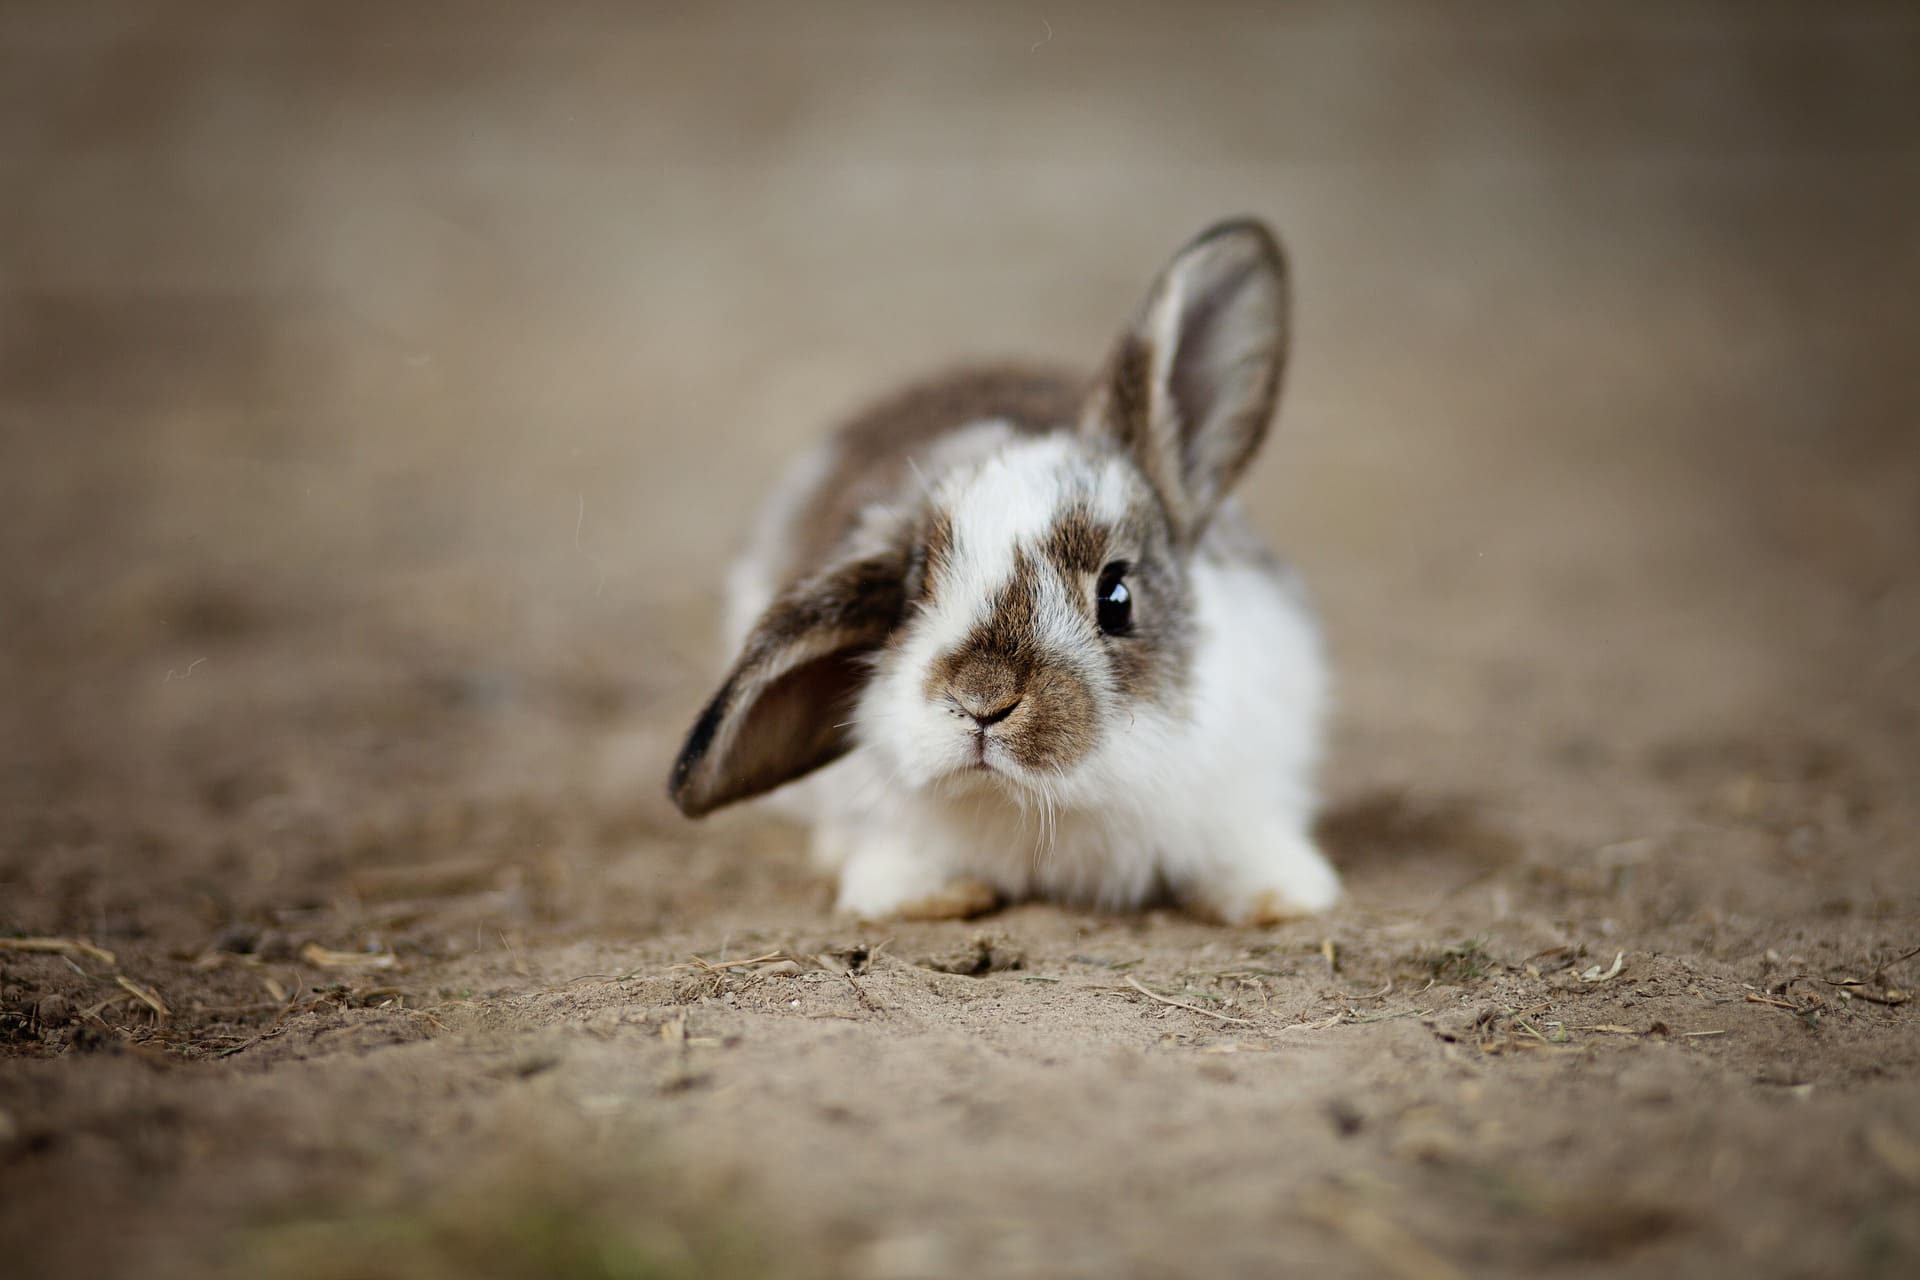 A small bunny stares at the camera  | Source: Pixabay